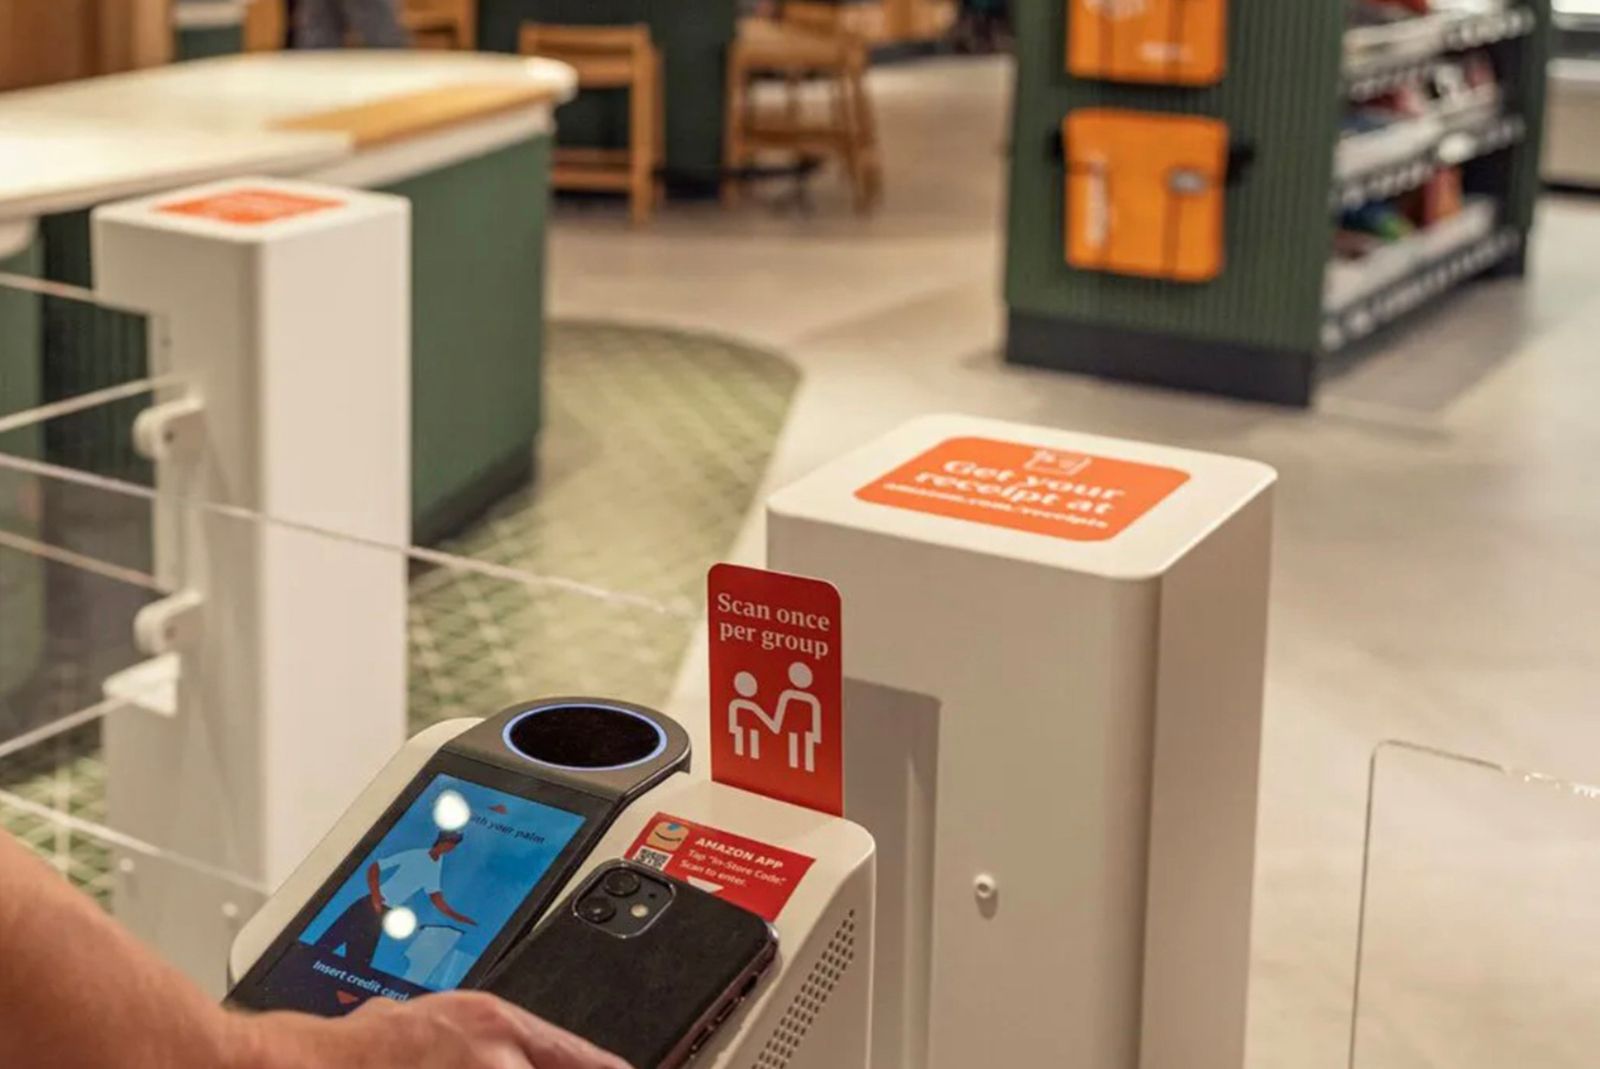 Starbucks opens a pickup store in NYC with Amazon Go cashierless tech photo 1